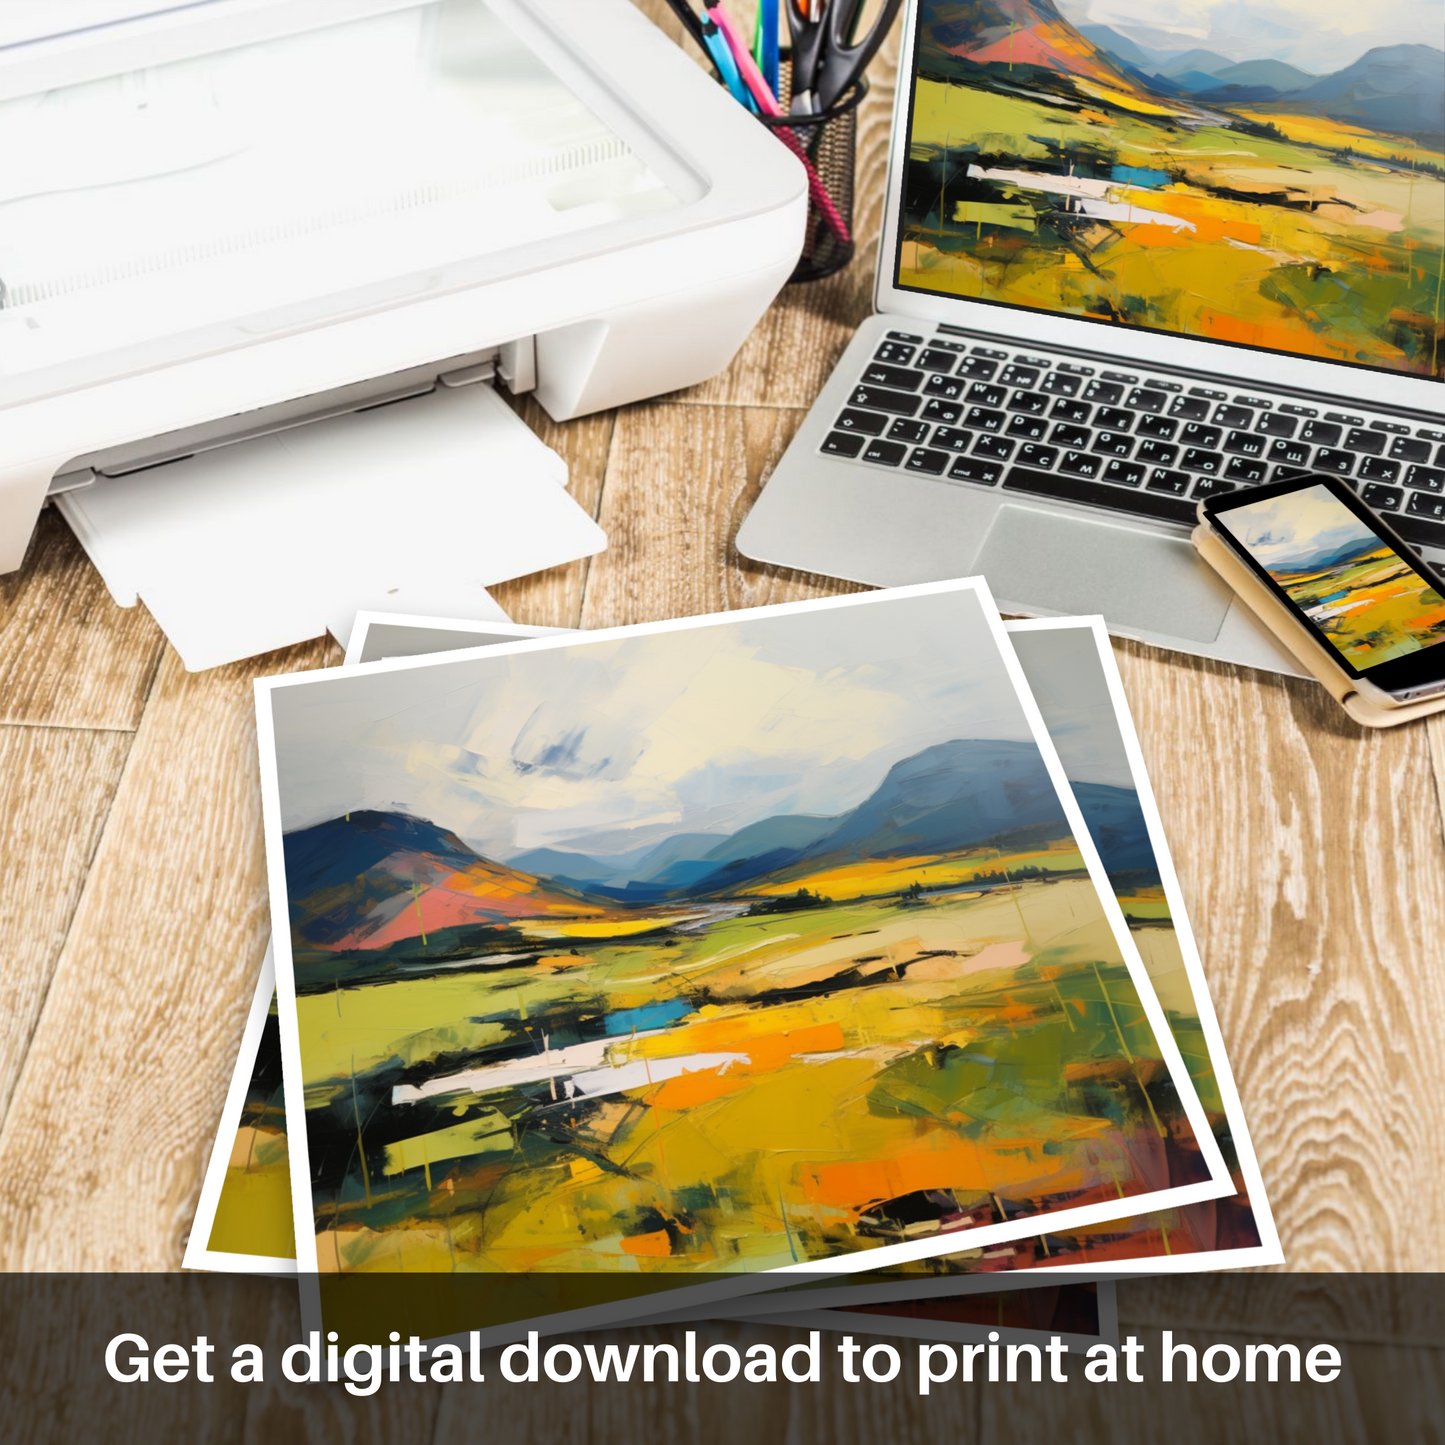 Downloadable and printable picture of Glen Garry, Highlands in summer